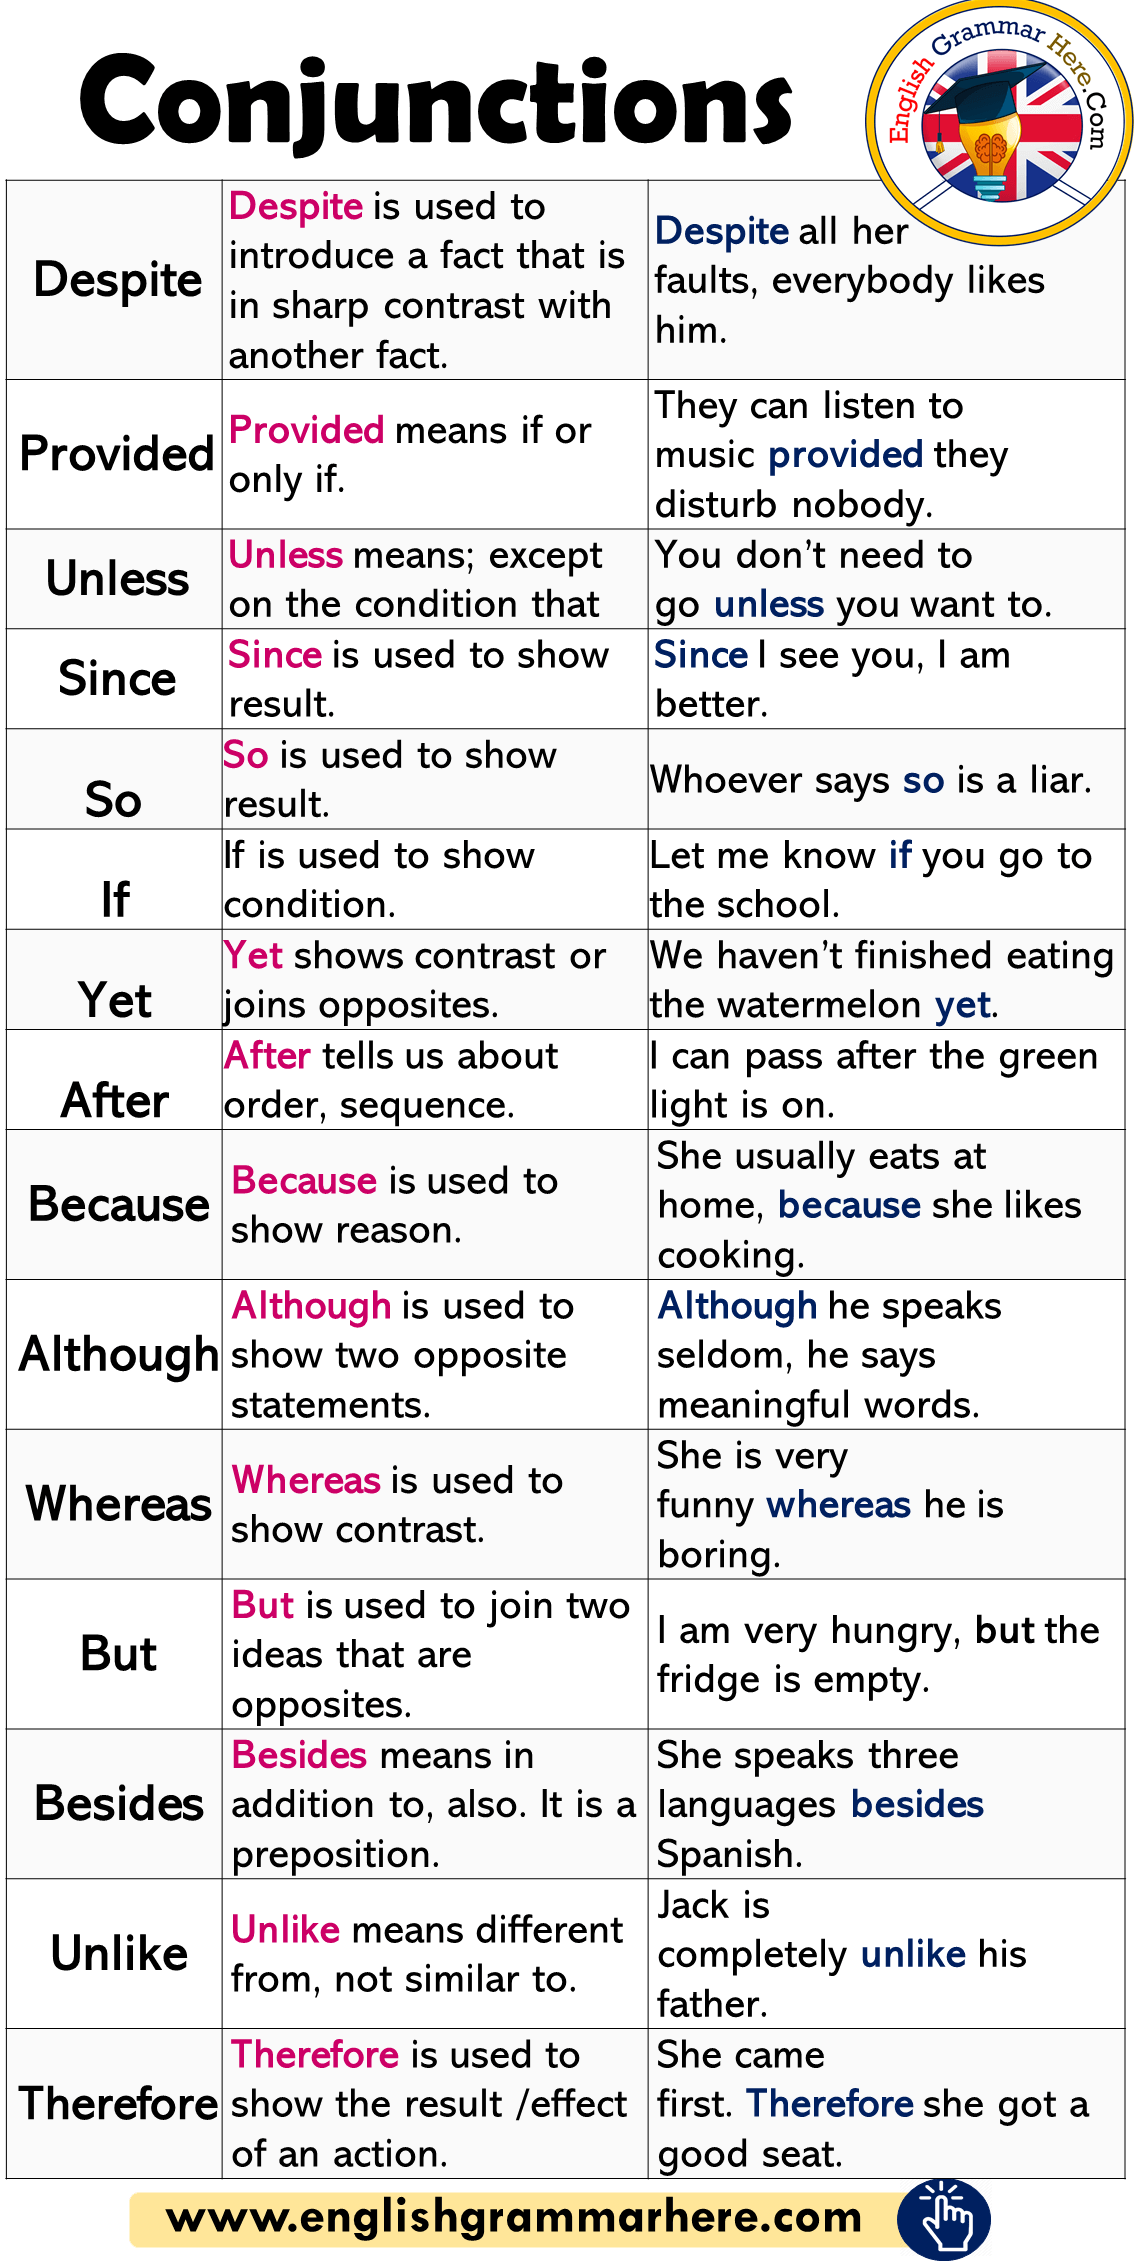 Conjunctions, Definitions and Example Sentences in English